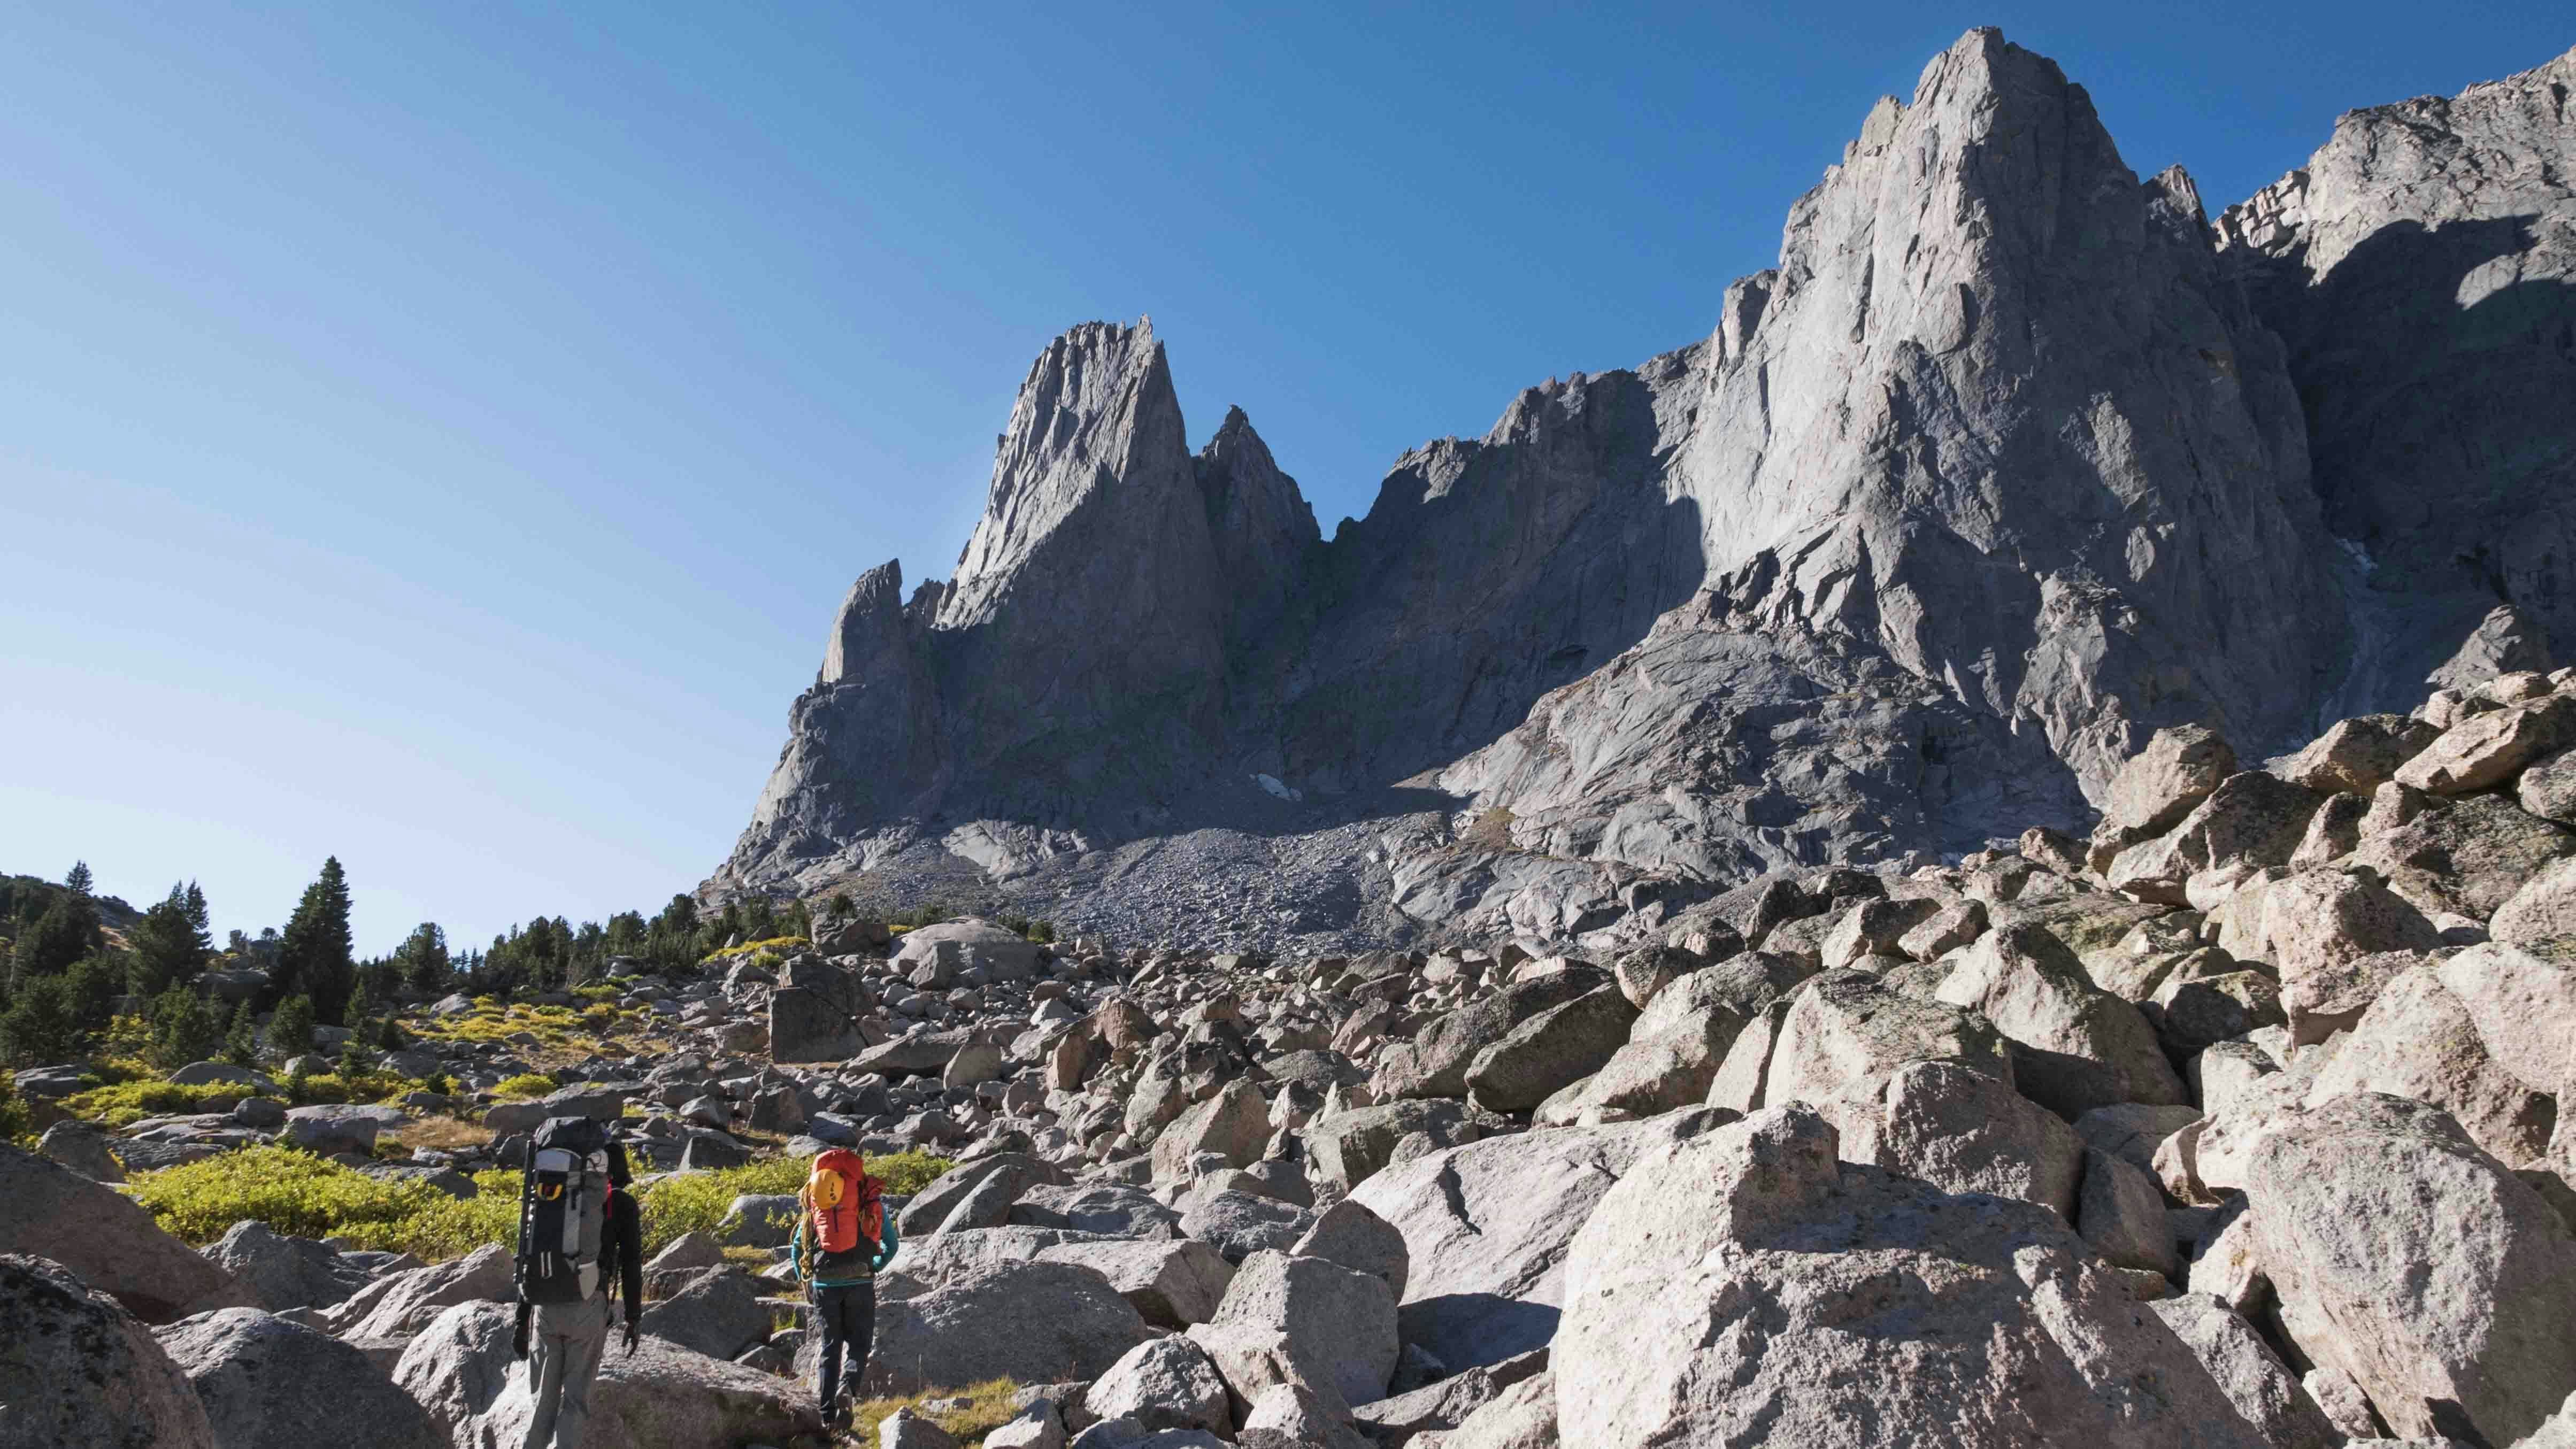 Hikers in the Cirque of the Towers, Popo Agie Wilderness, Wind River Range Wyoming